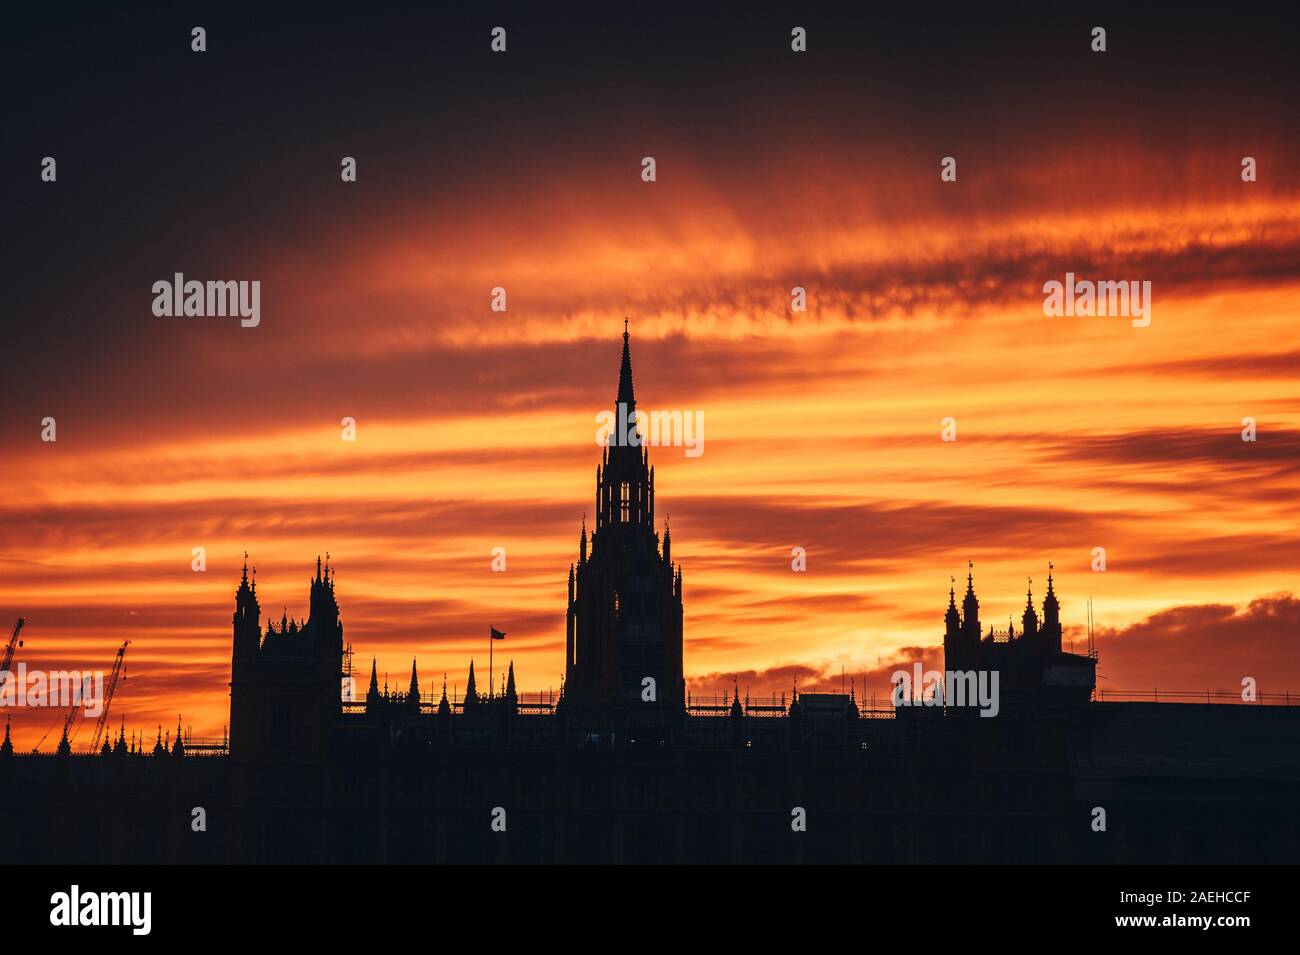 Silhouette of House of parliament in London, Beautiful summer sky in background. Stock Photo